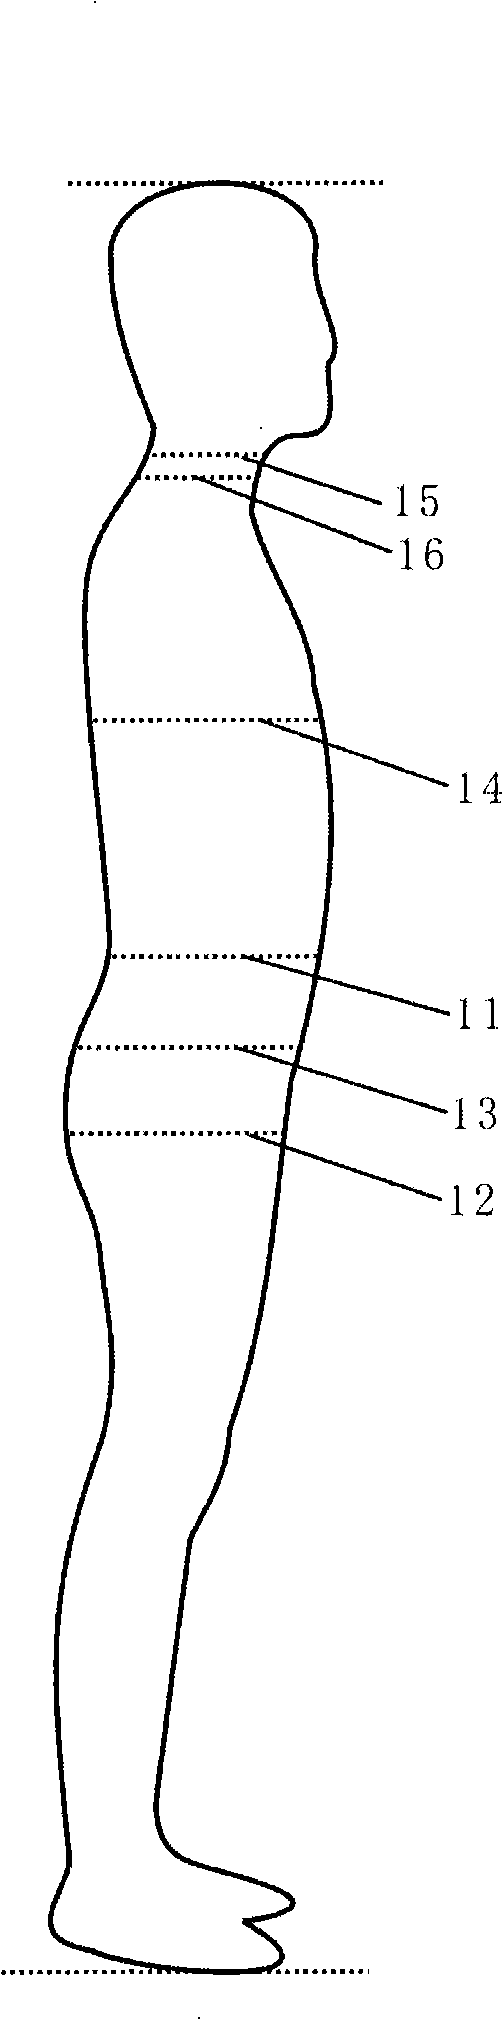 Non-contact type human body measuring method for clothing design